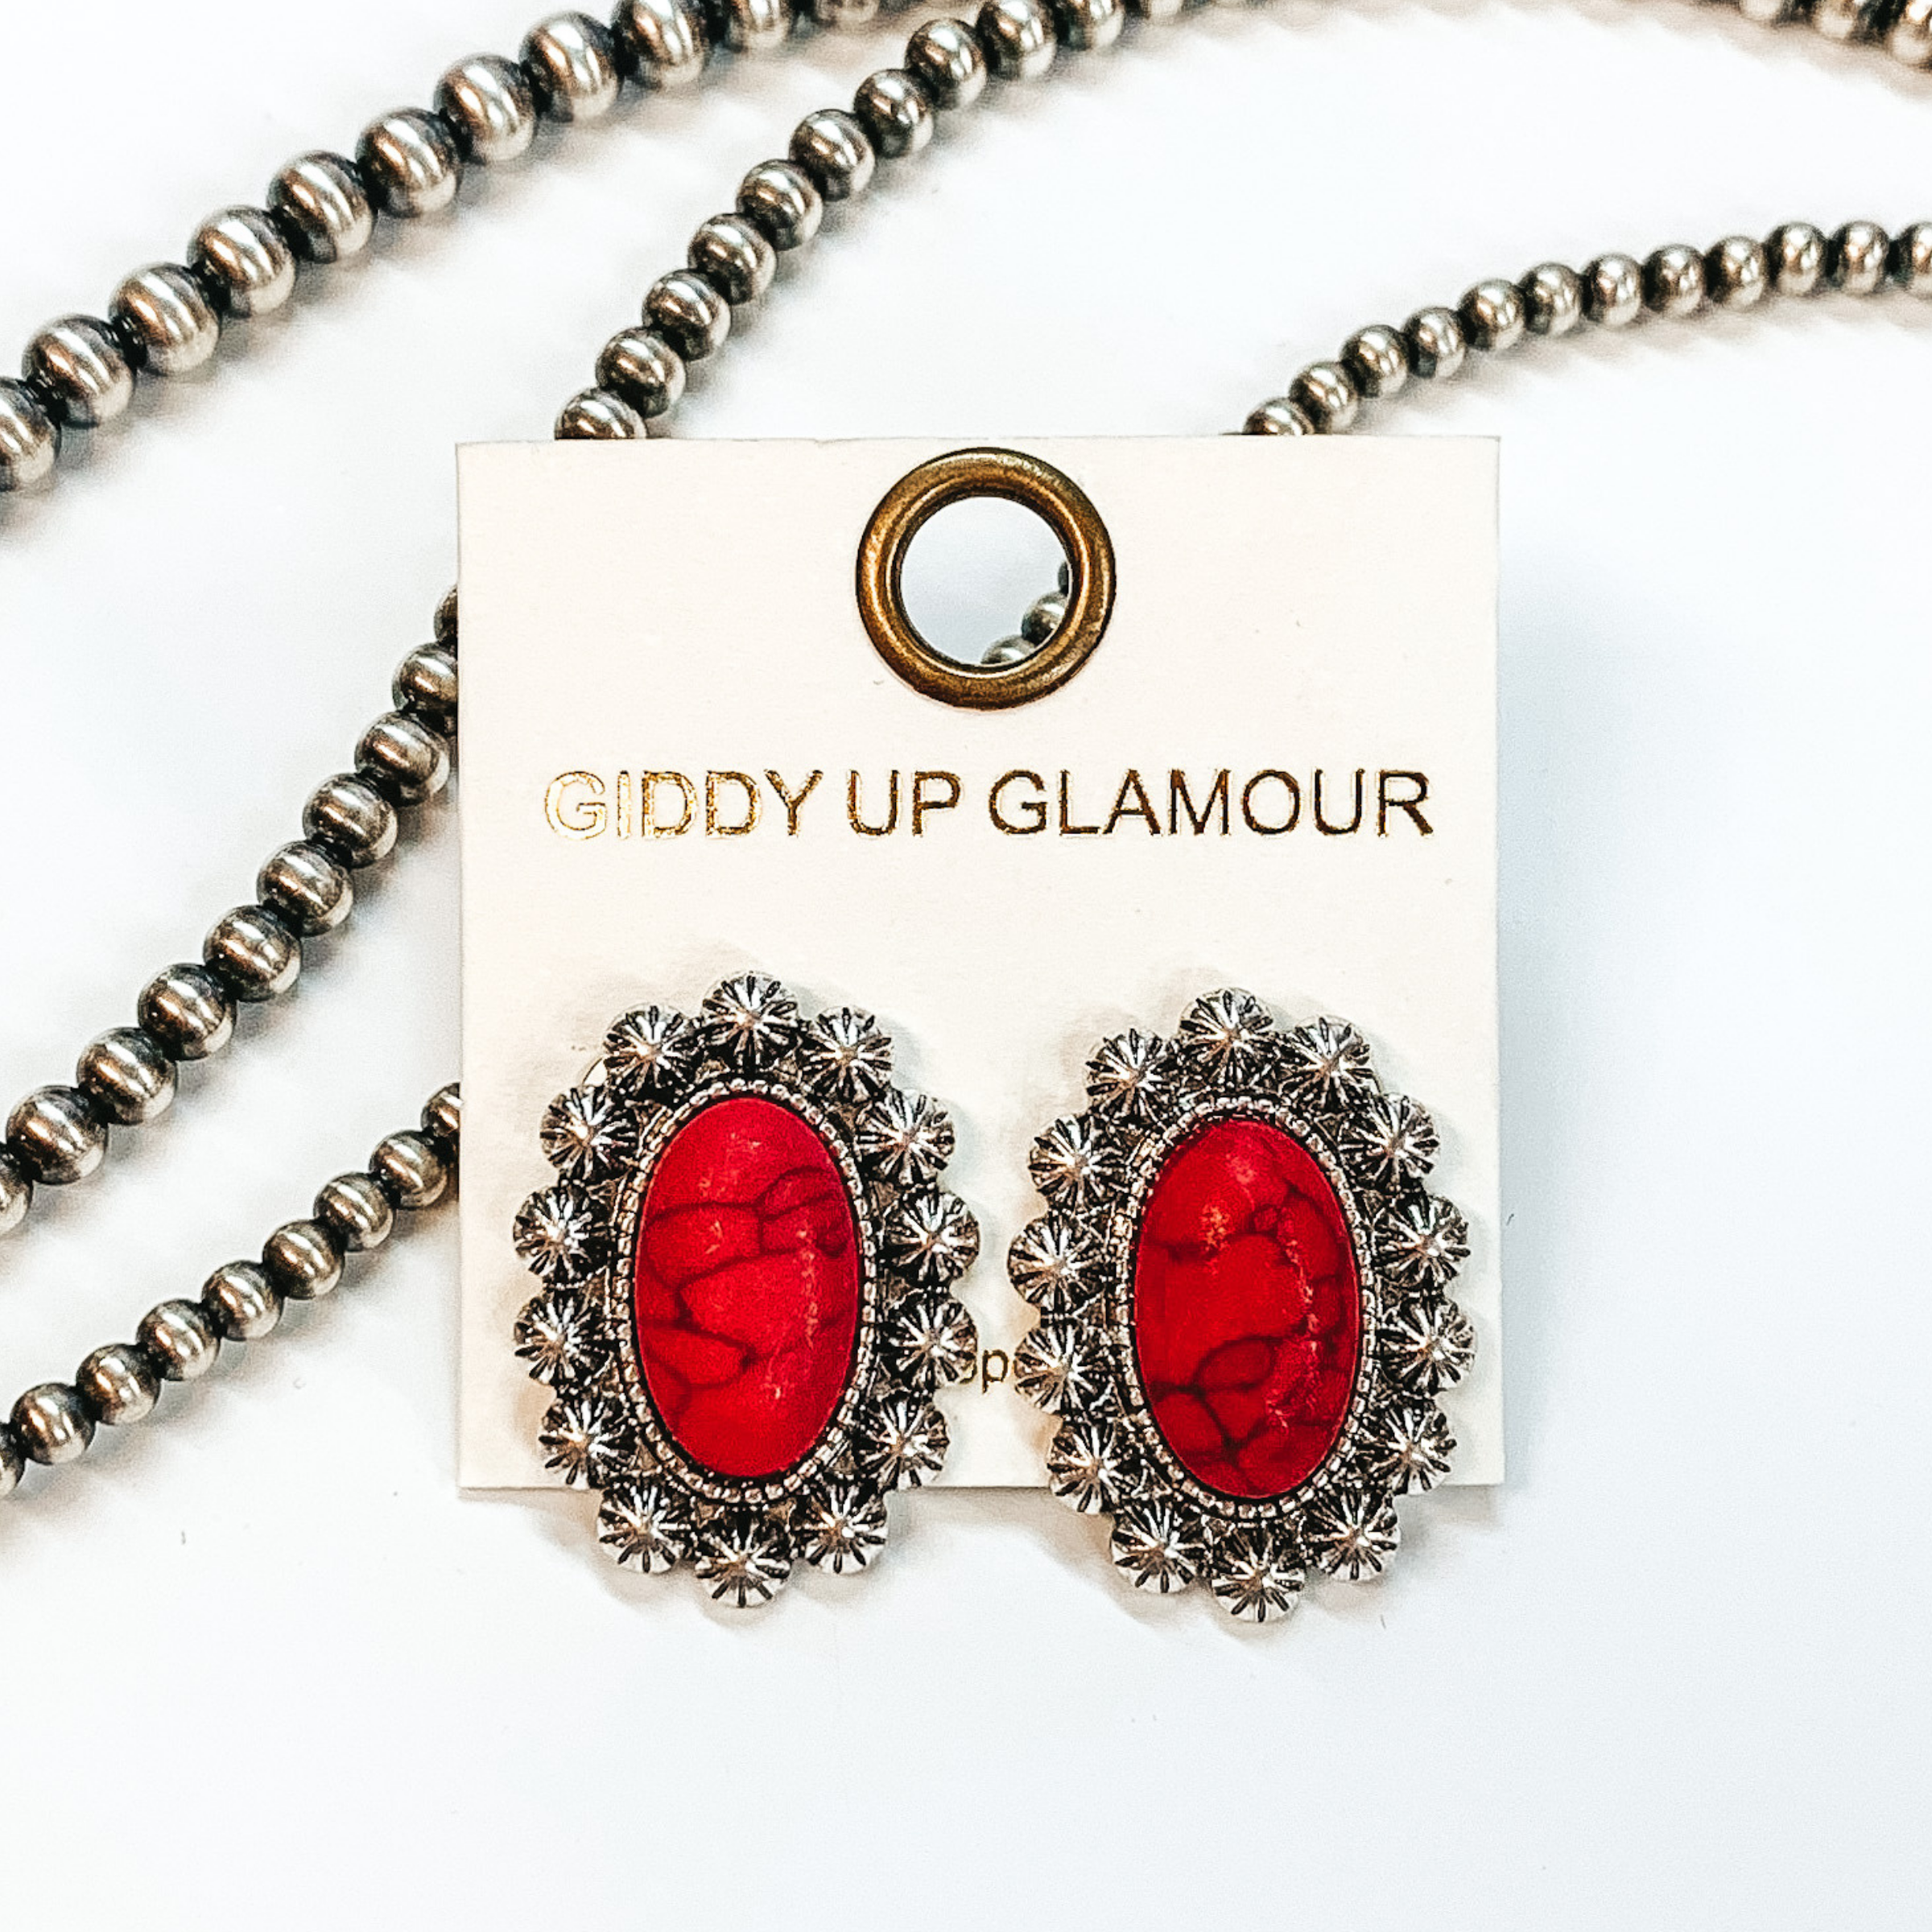 Shown here are post back earrings with a red stone in the center with silver lining with  engraved details. Taken in a white background with  beads as decor.